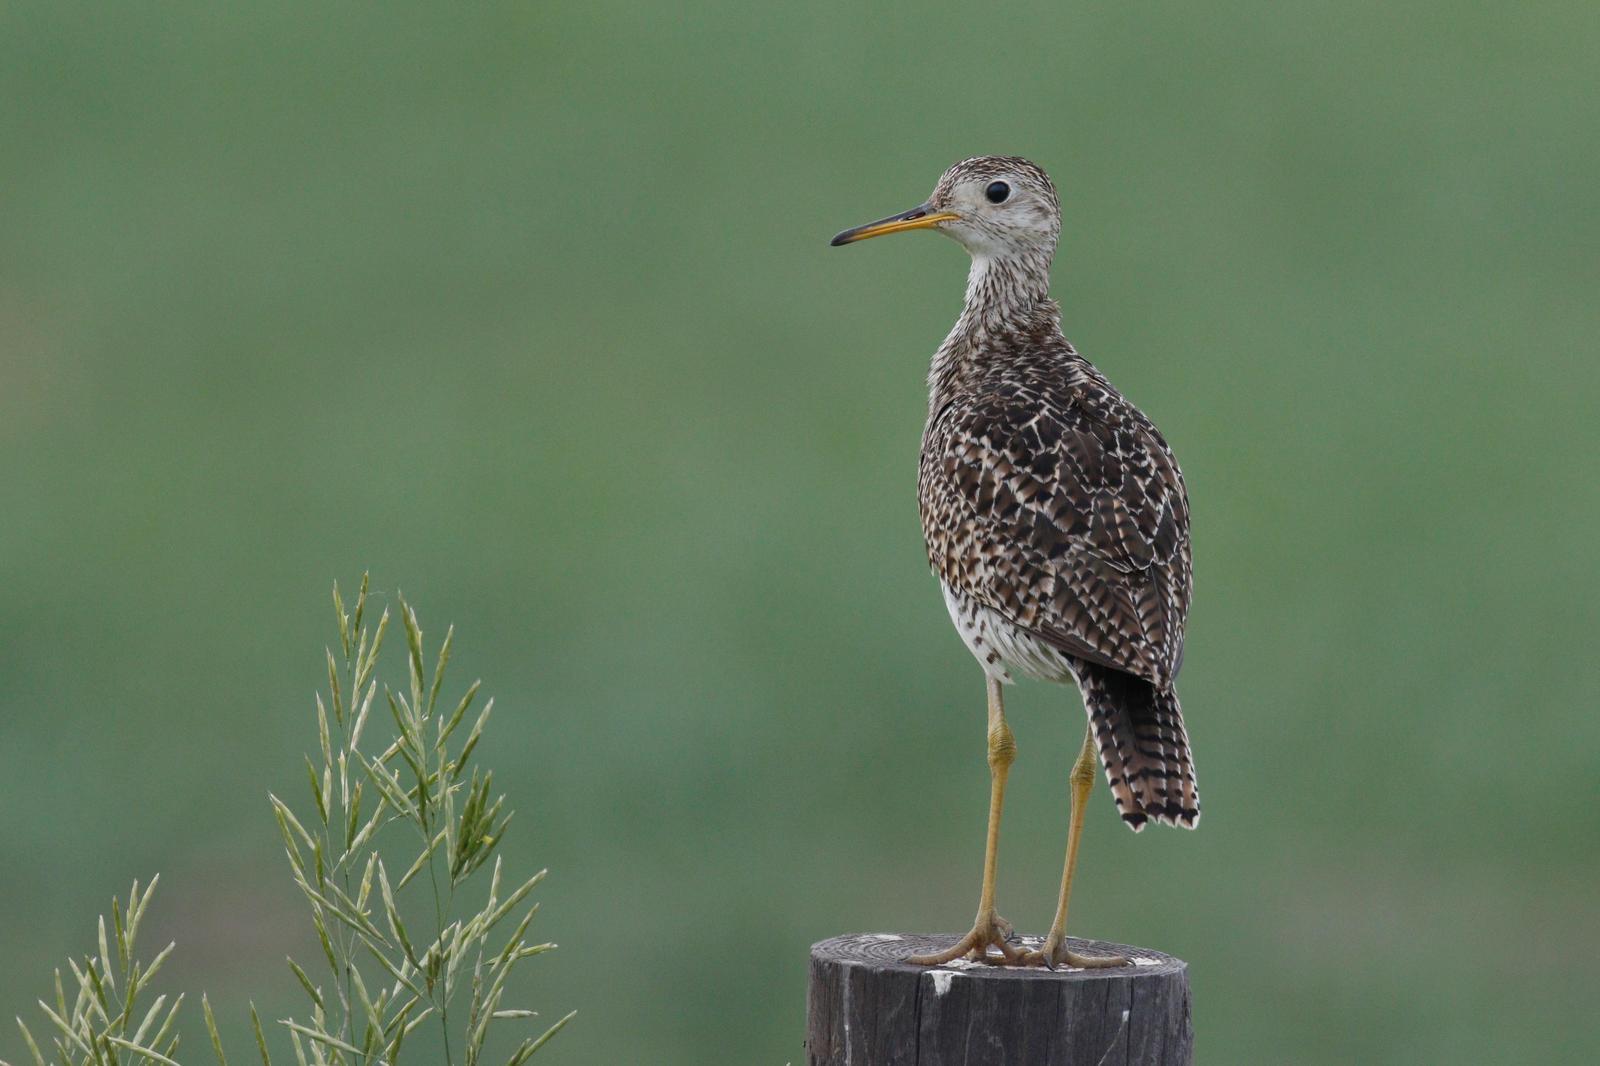 Upland Sandpiper Photo by Emily Willoughby